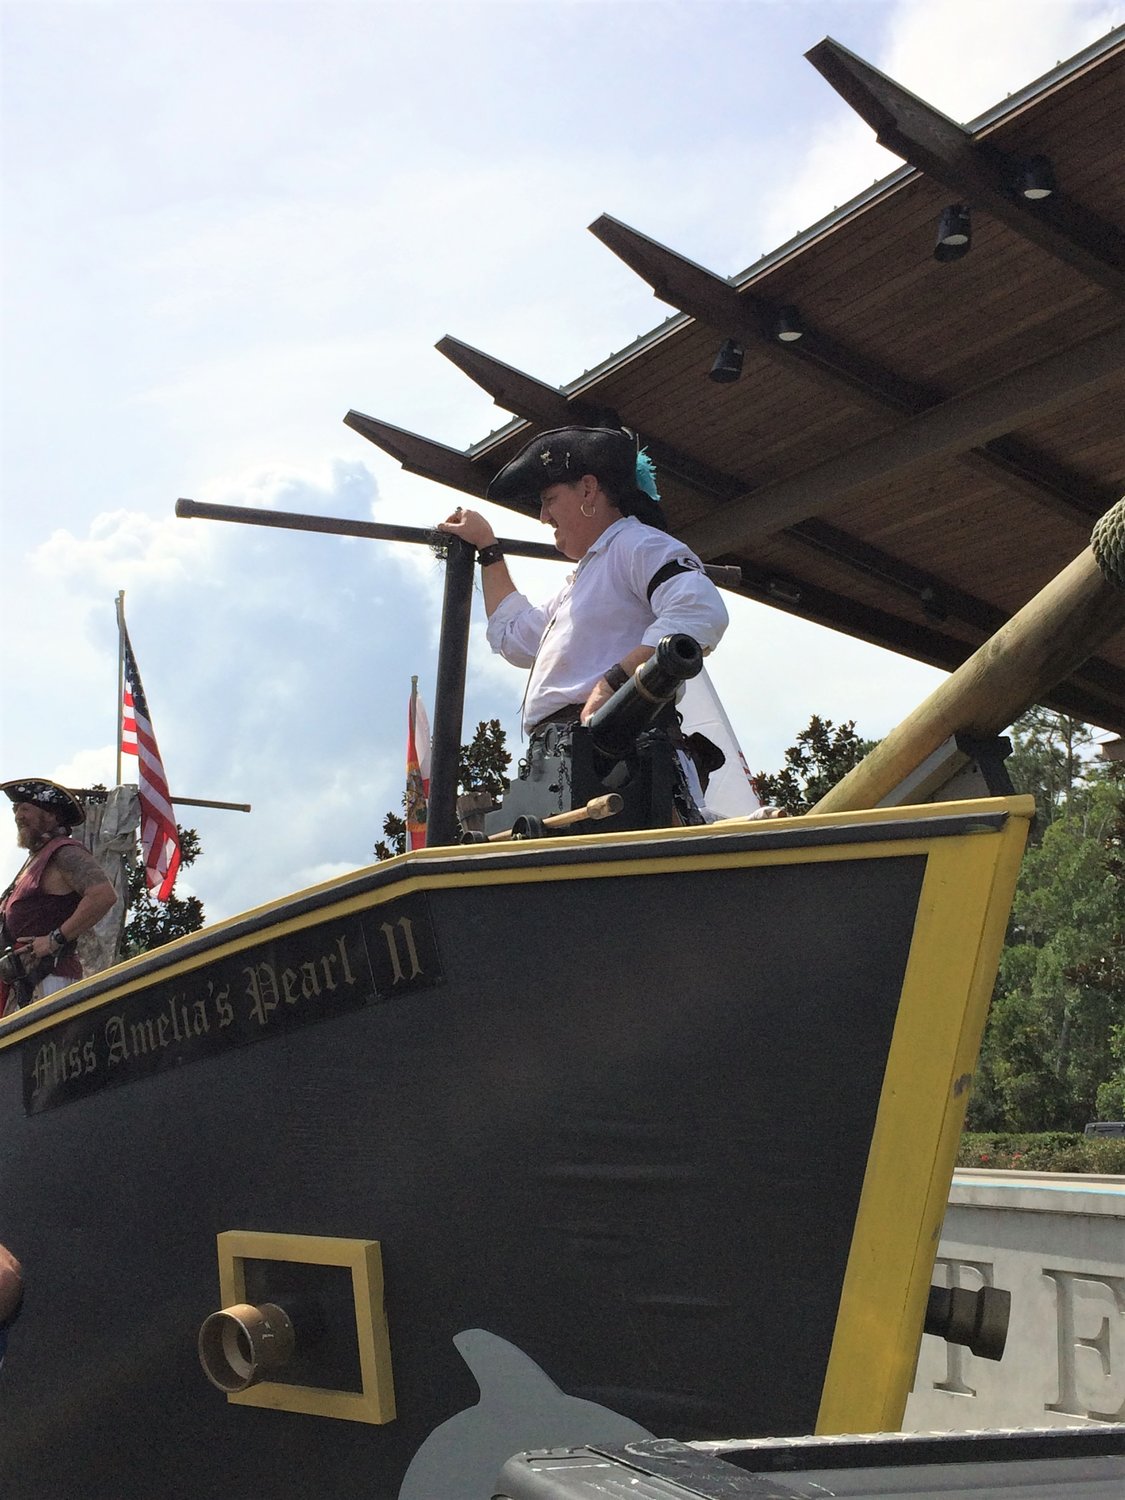 "Pirates" invade the Nocatee Farmers Market.